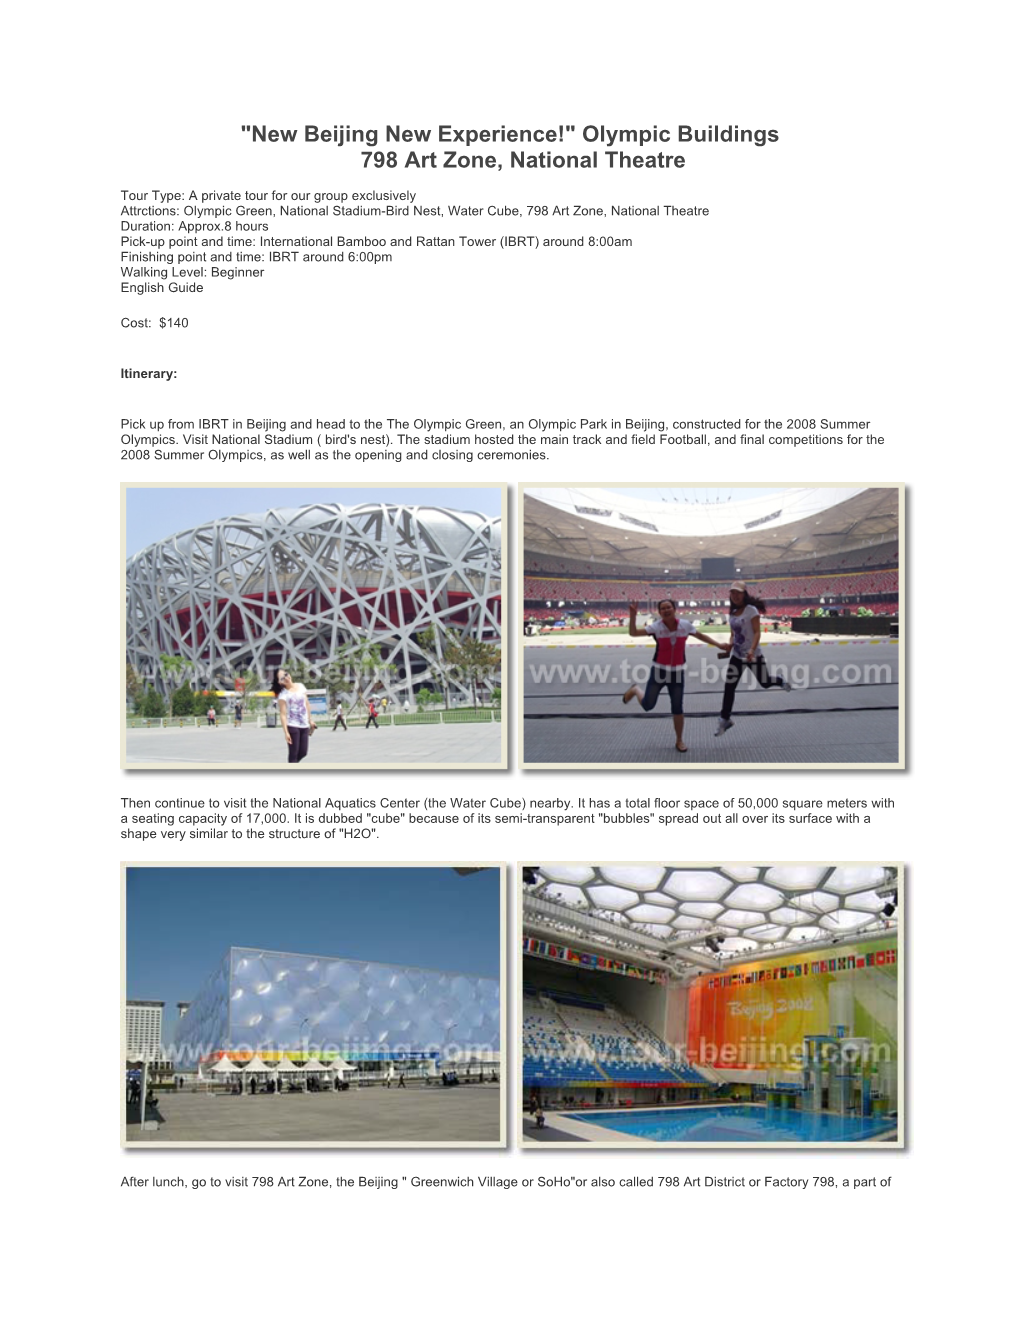 "New Beijing New Experience!" Olympic Buildings 798 Art Zone, National Theatre